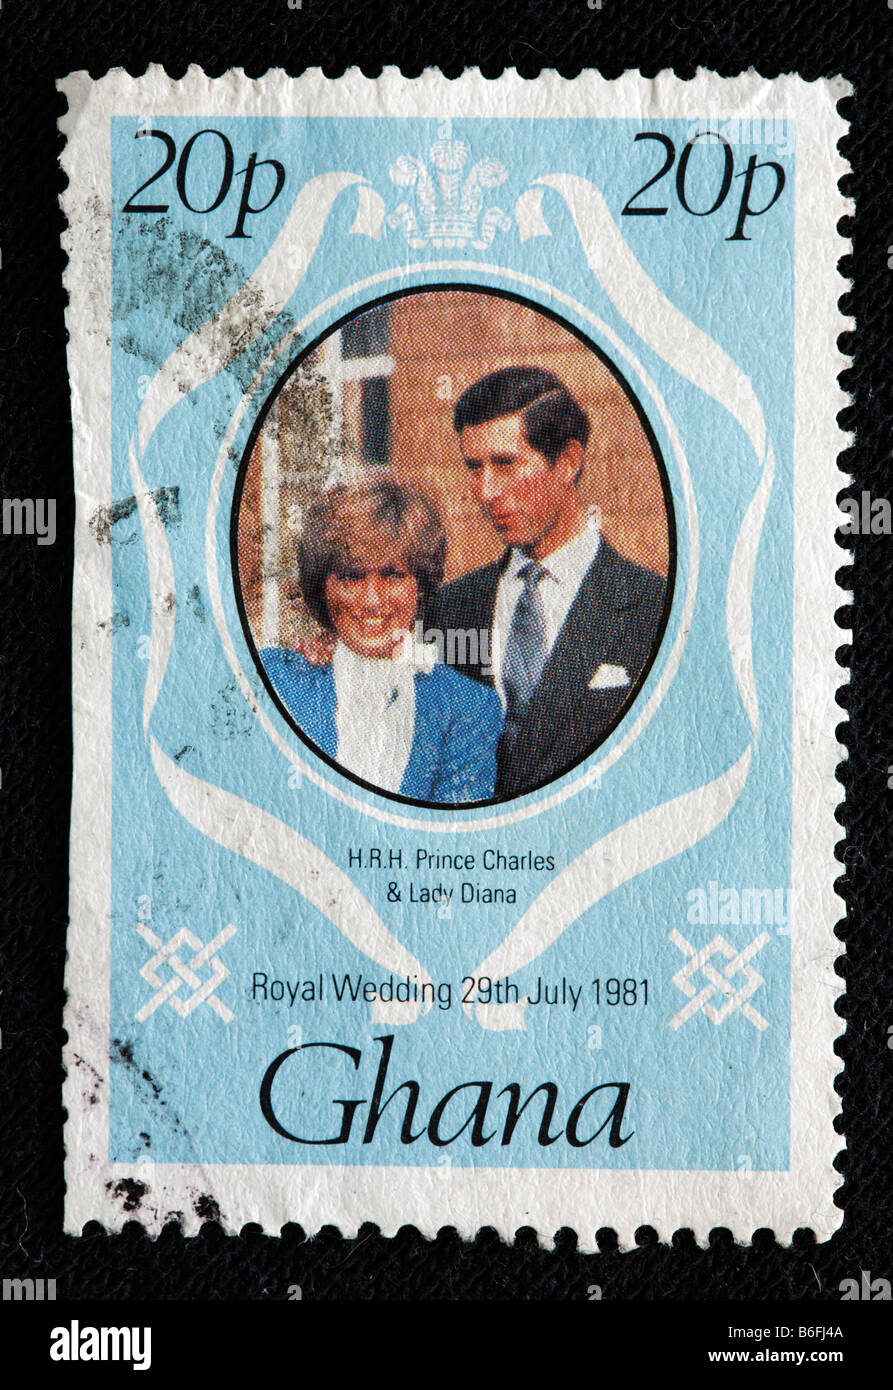 Wedding of Prince Charles and Lady Diana 29 July 1981, postage stamp, Ghana, 1981 Stock Photo